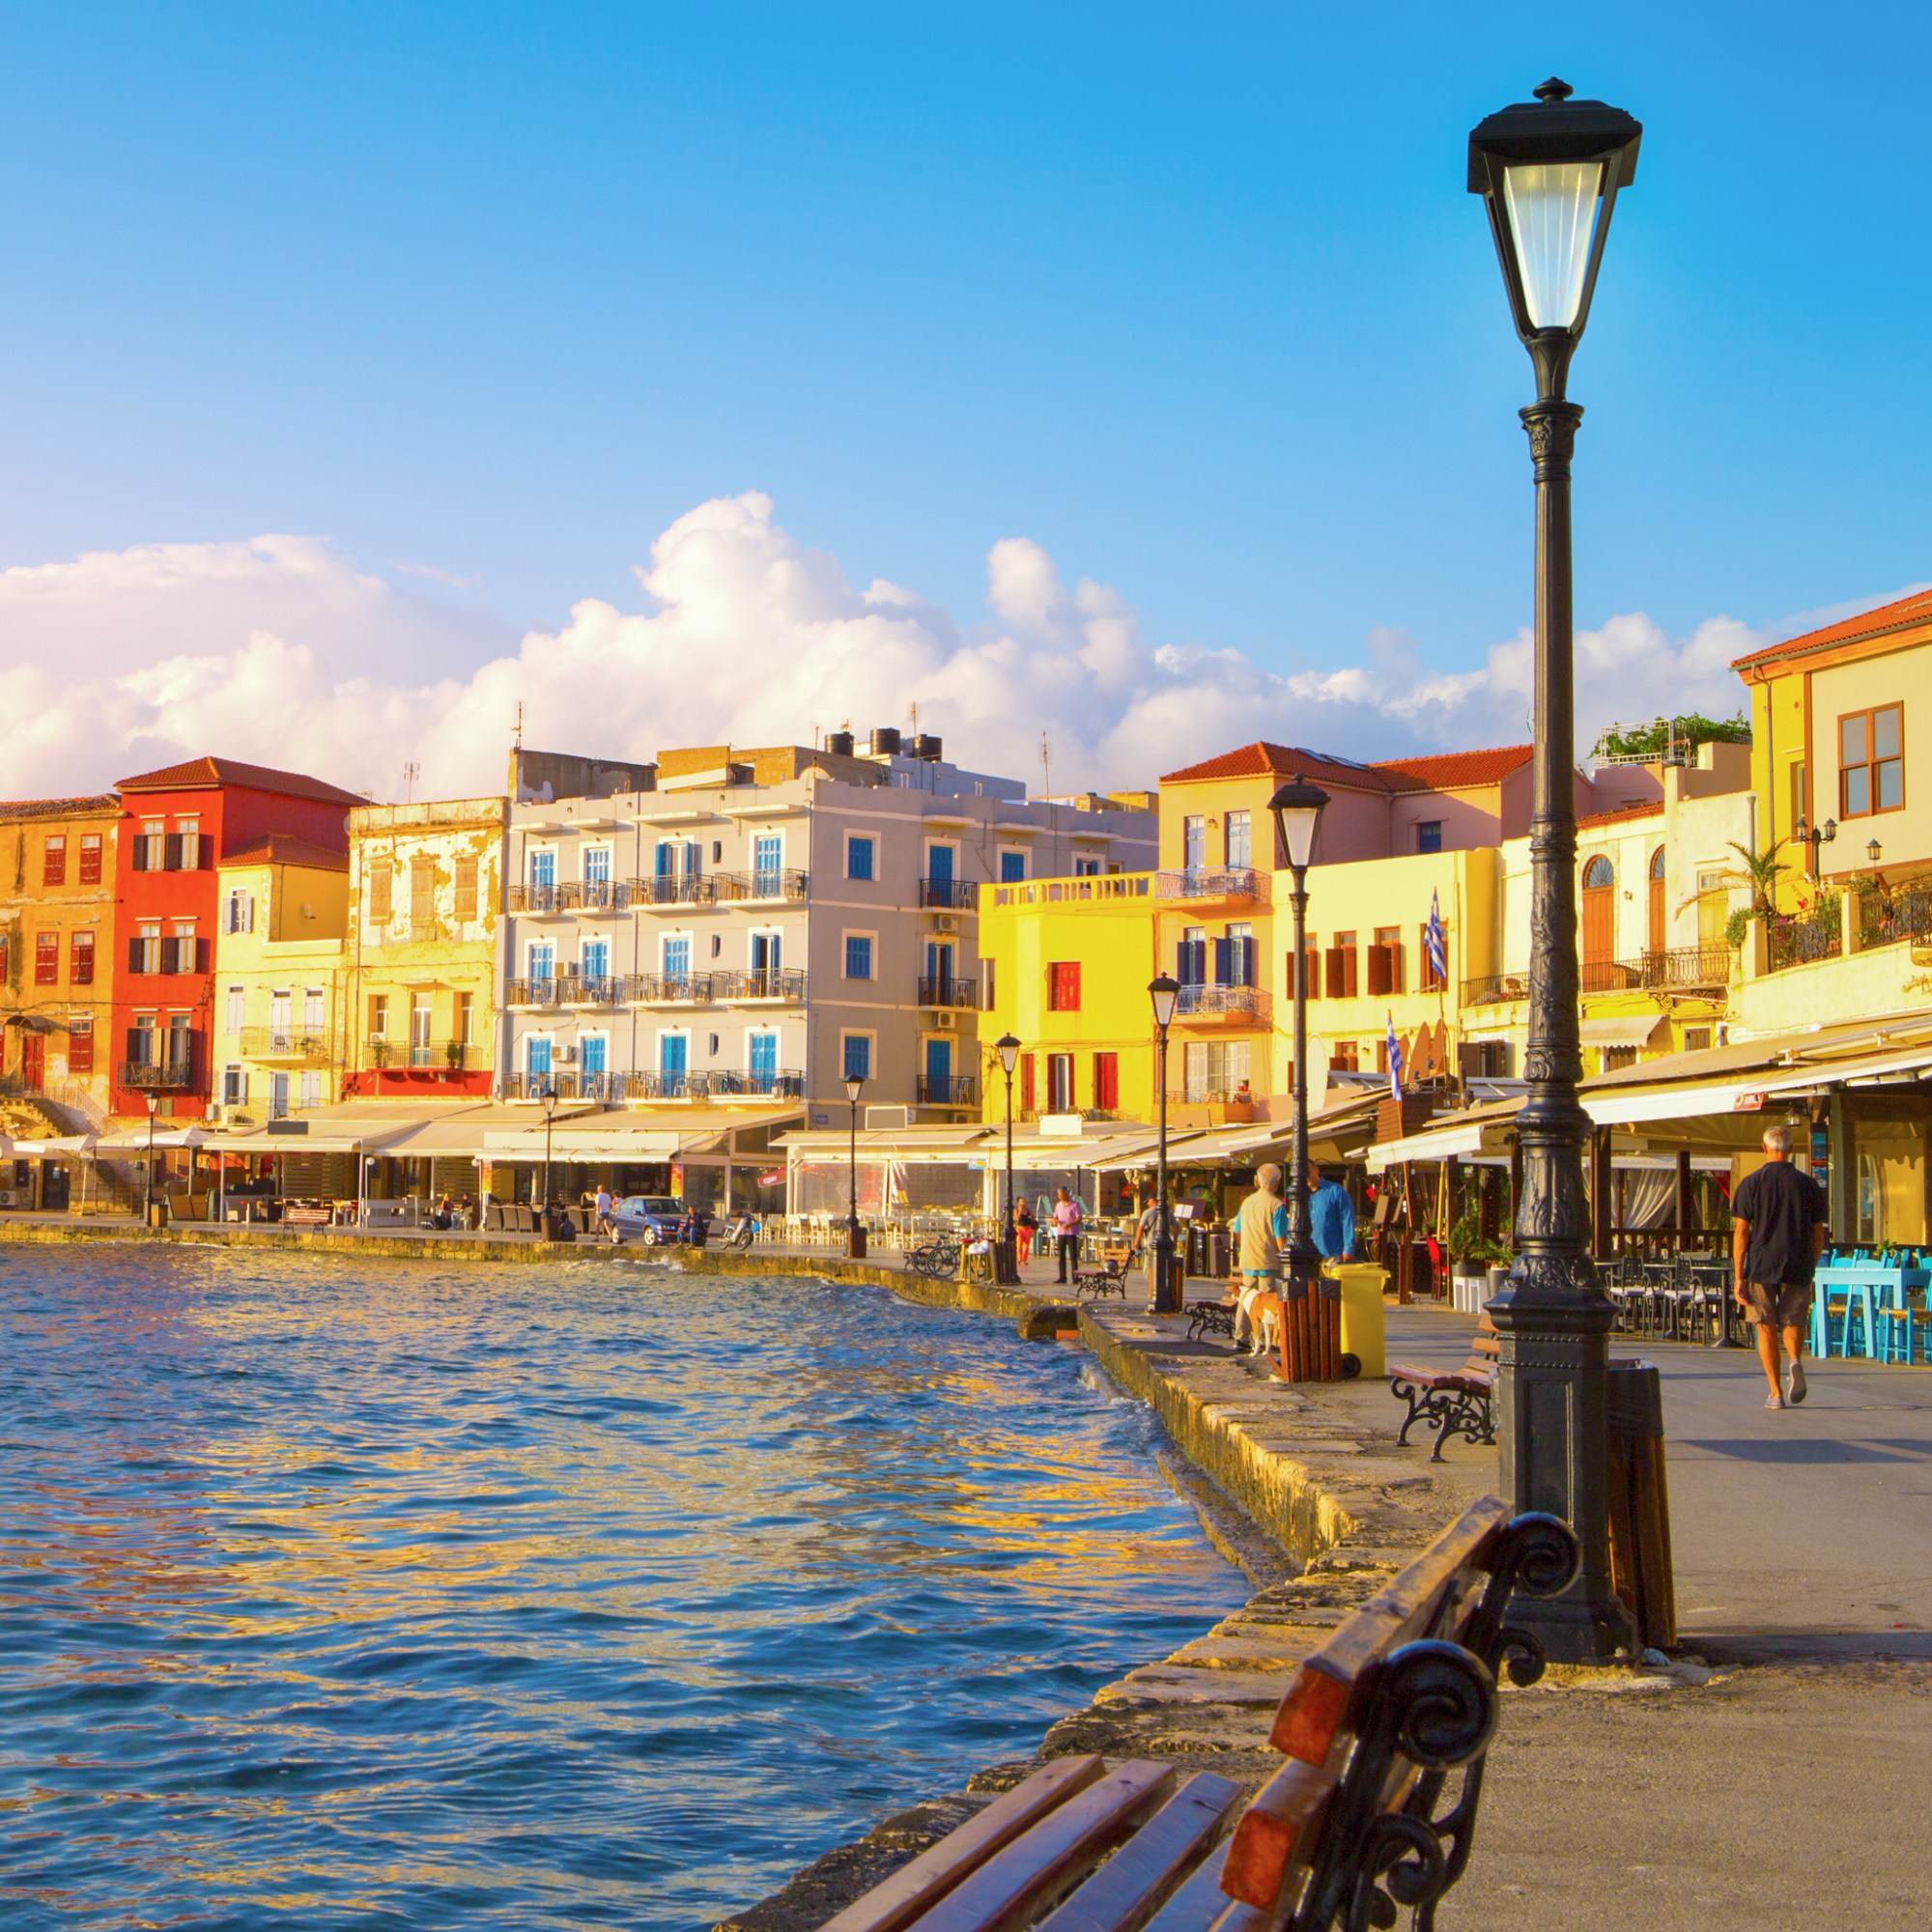 Views of the Old Port of Chania, Greece.